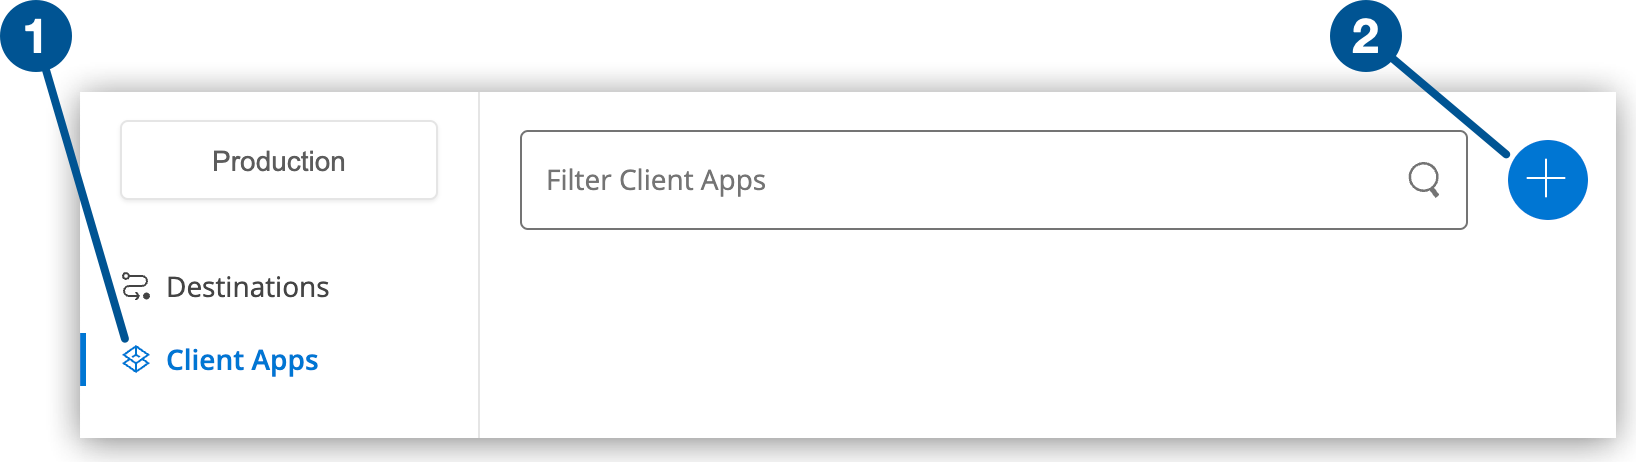 Client Apps option and Add icon